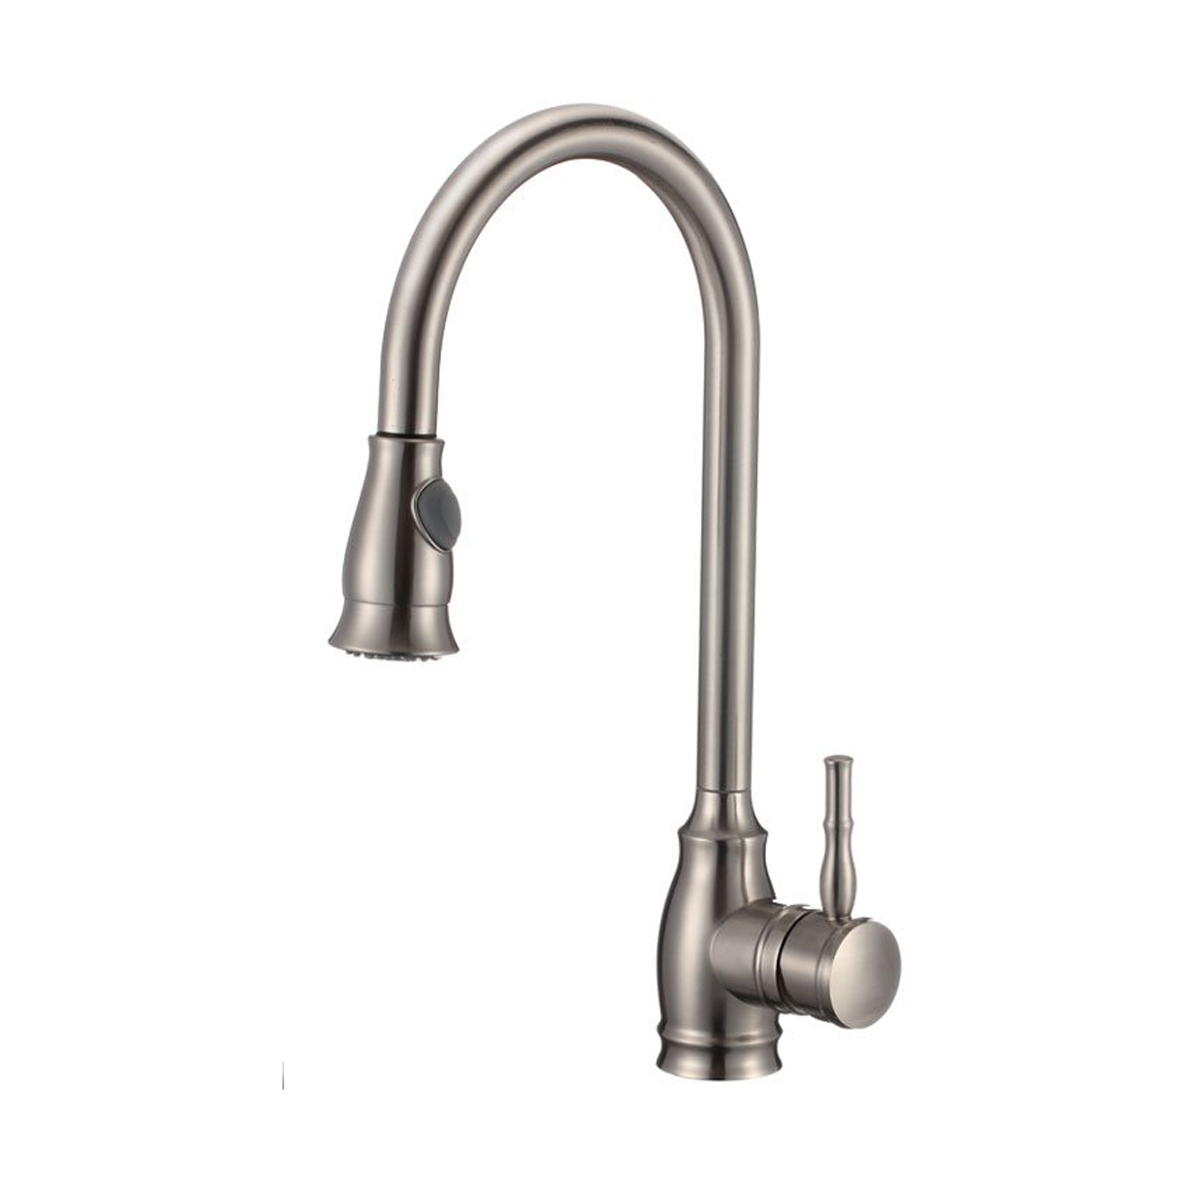 Pelican Int'l Fountain Series PL-8217 Single Hole Pull Down Kitchen Faucet In Brushed Nickel